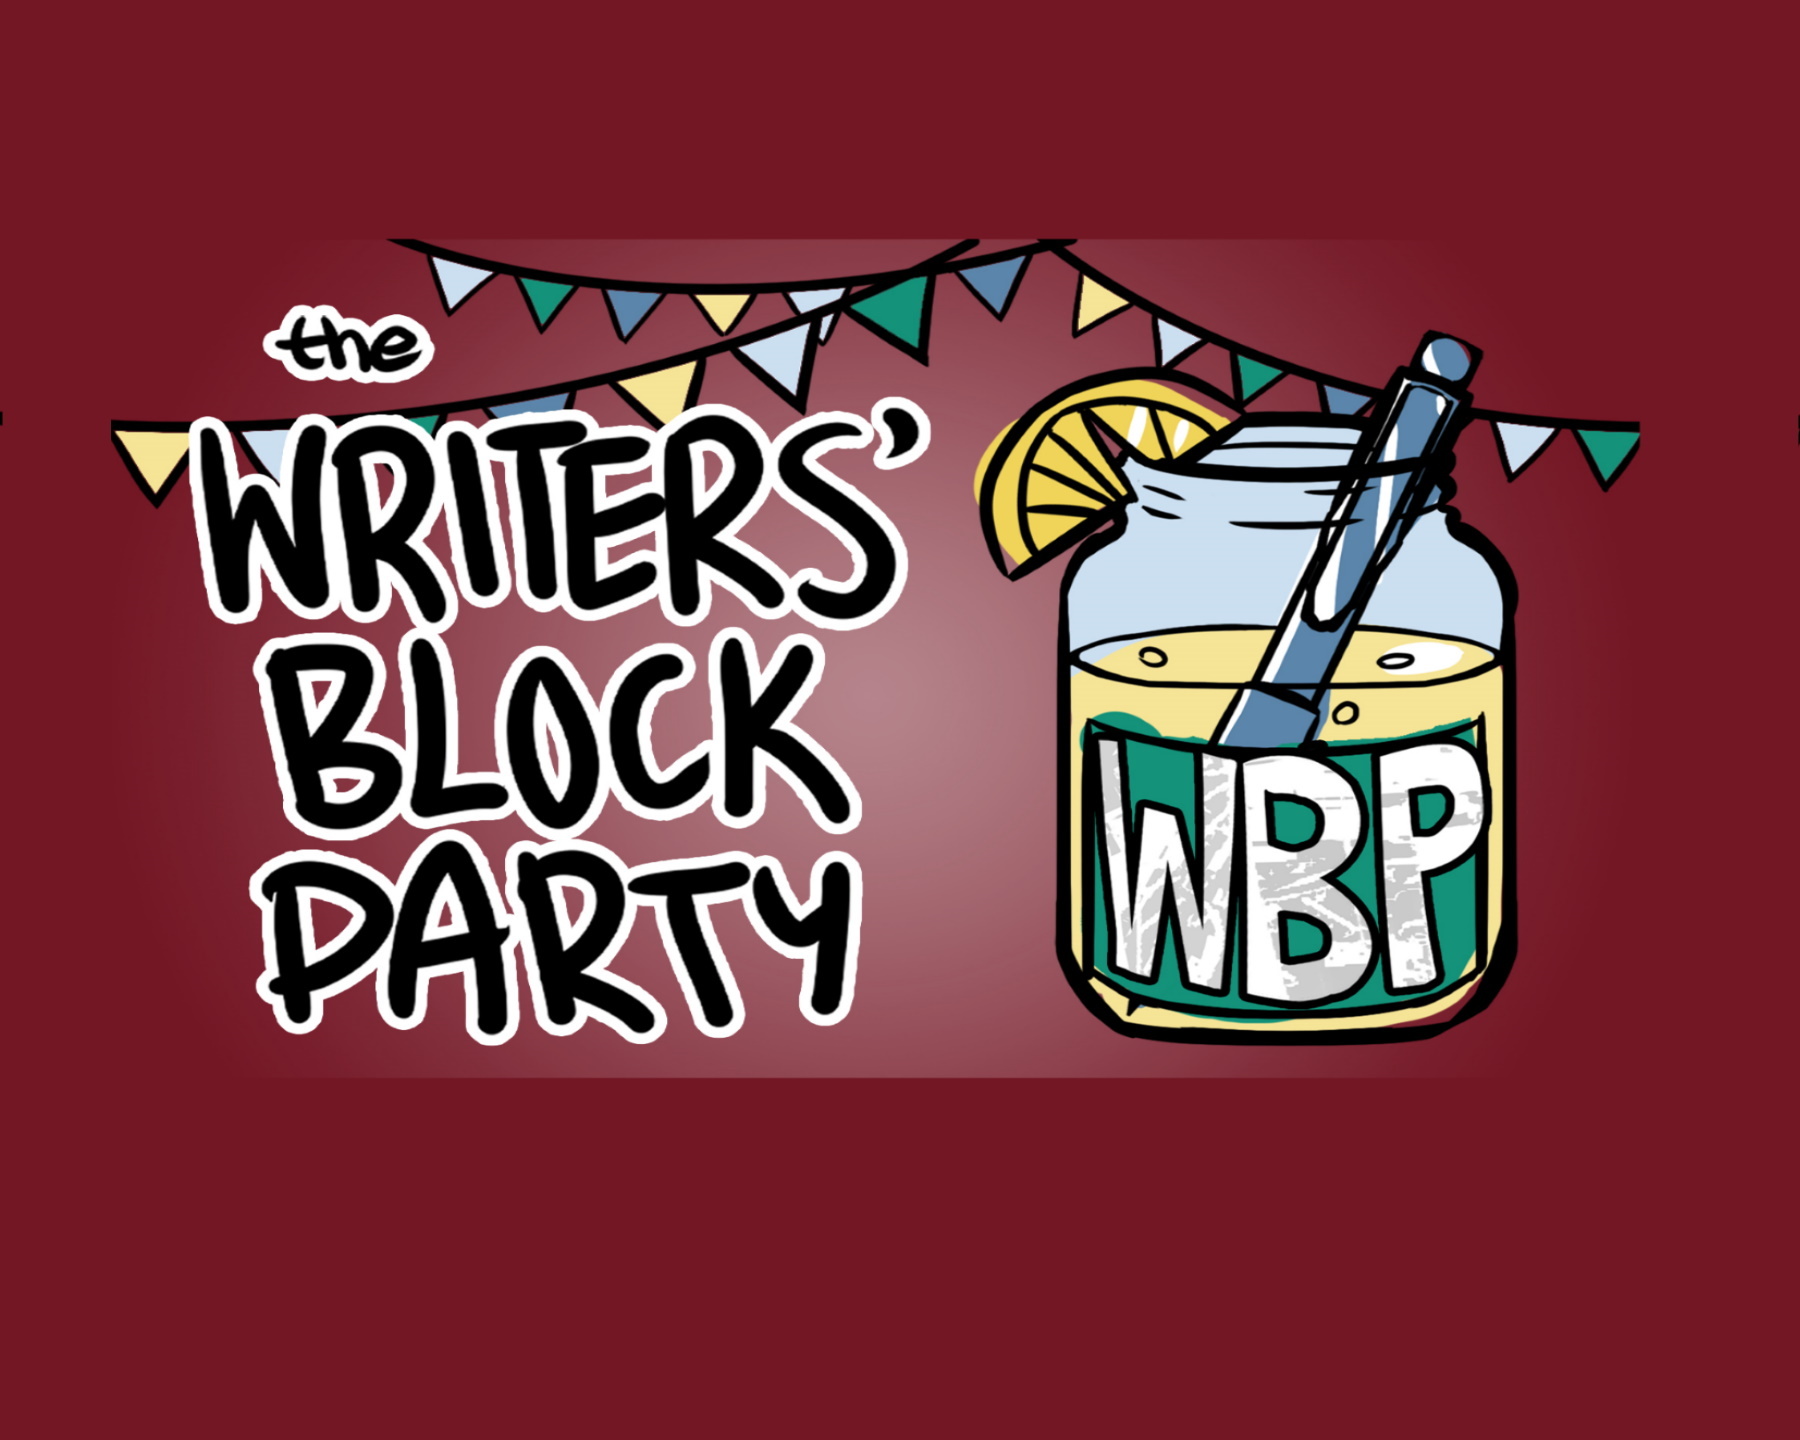 The Writers' Block Party Podcast